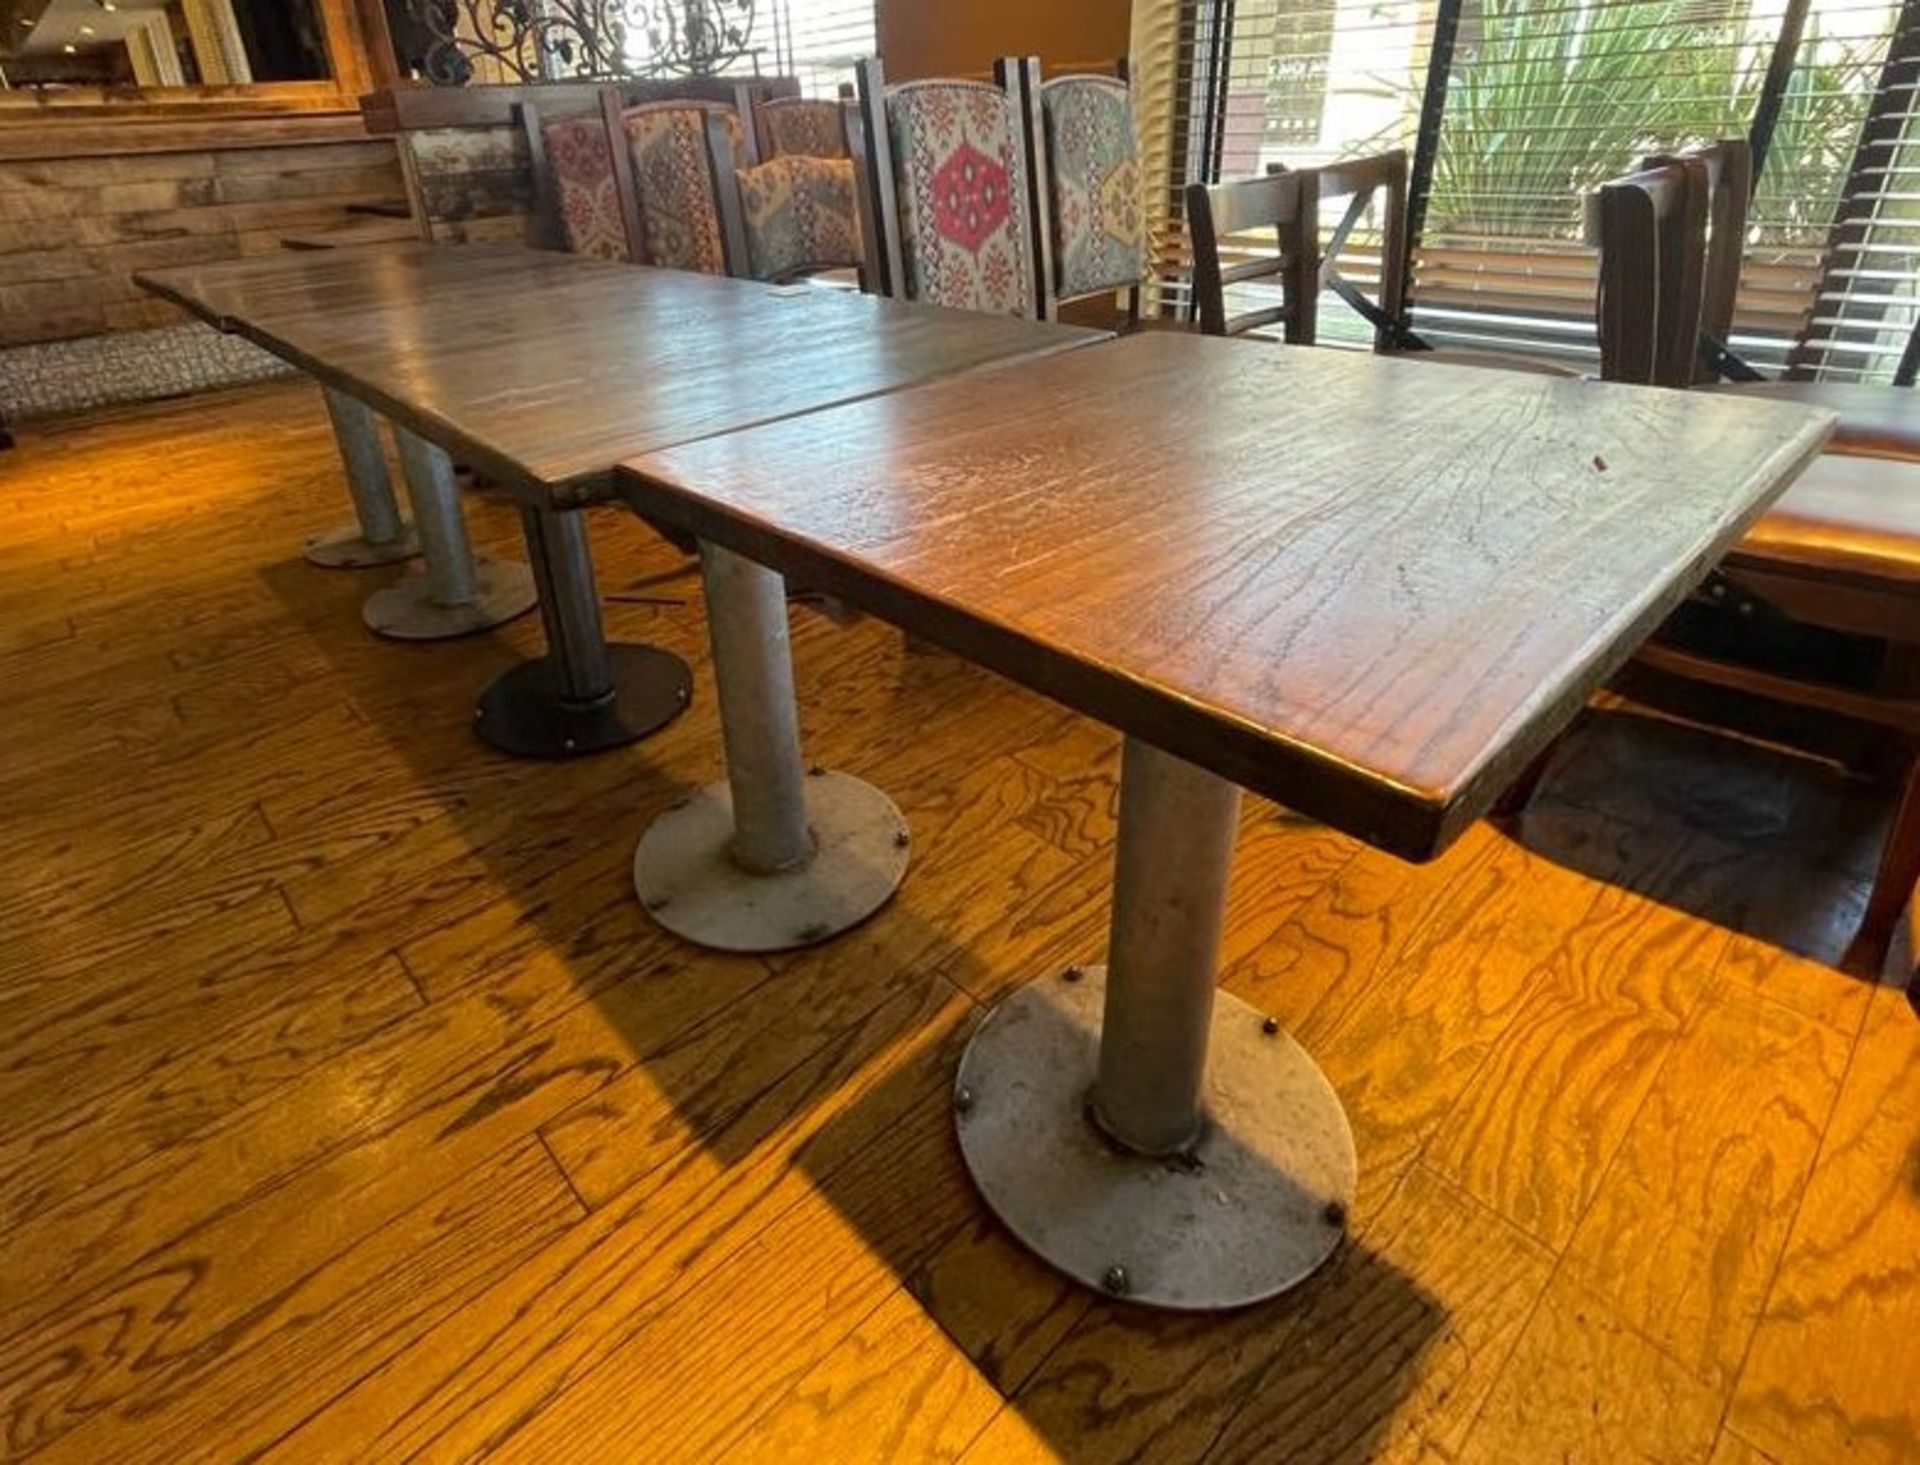 4 x Restaurant Dining Tables Featuring Industrial Style Bases and Wood Tops - Dimensions: H73 x - Image 5 of 9